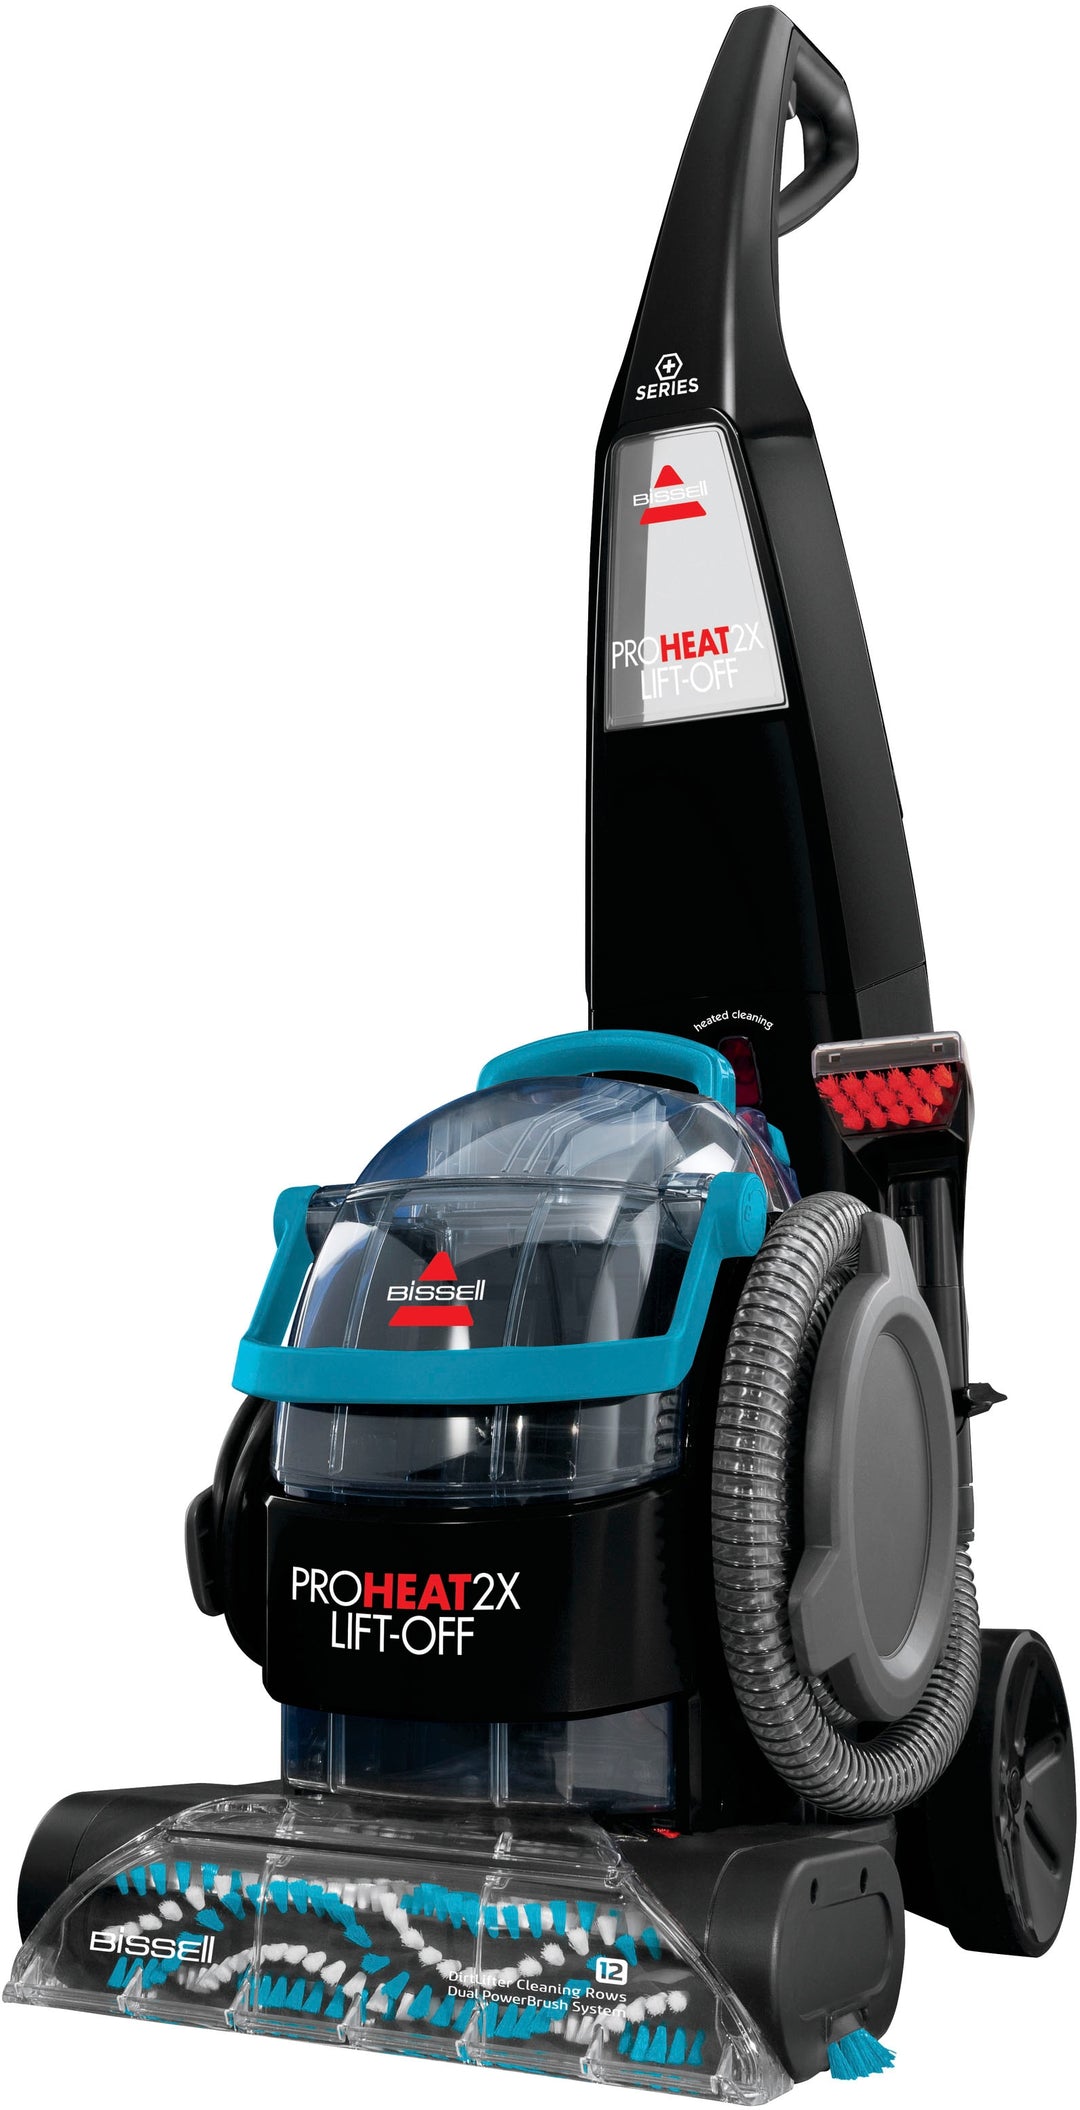 BISSELL - ProHeat 2X Lift-Off  Upright Deep Cleaner - Titanium and Teal_1